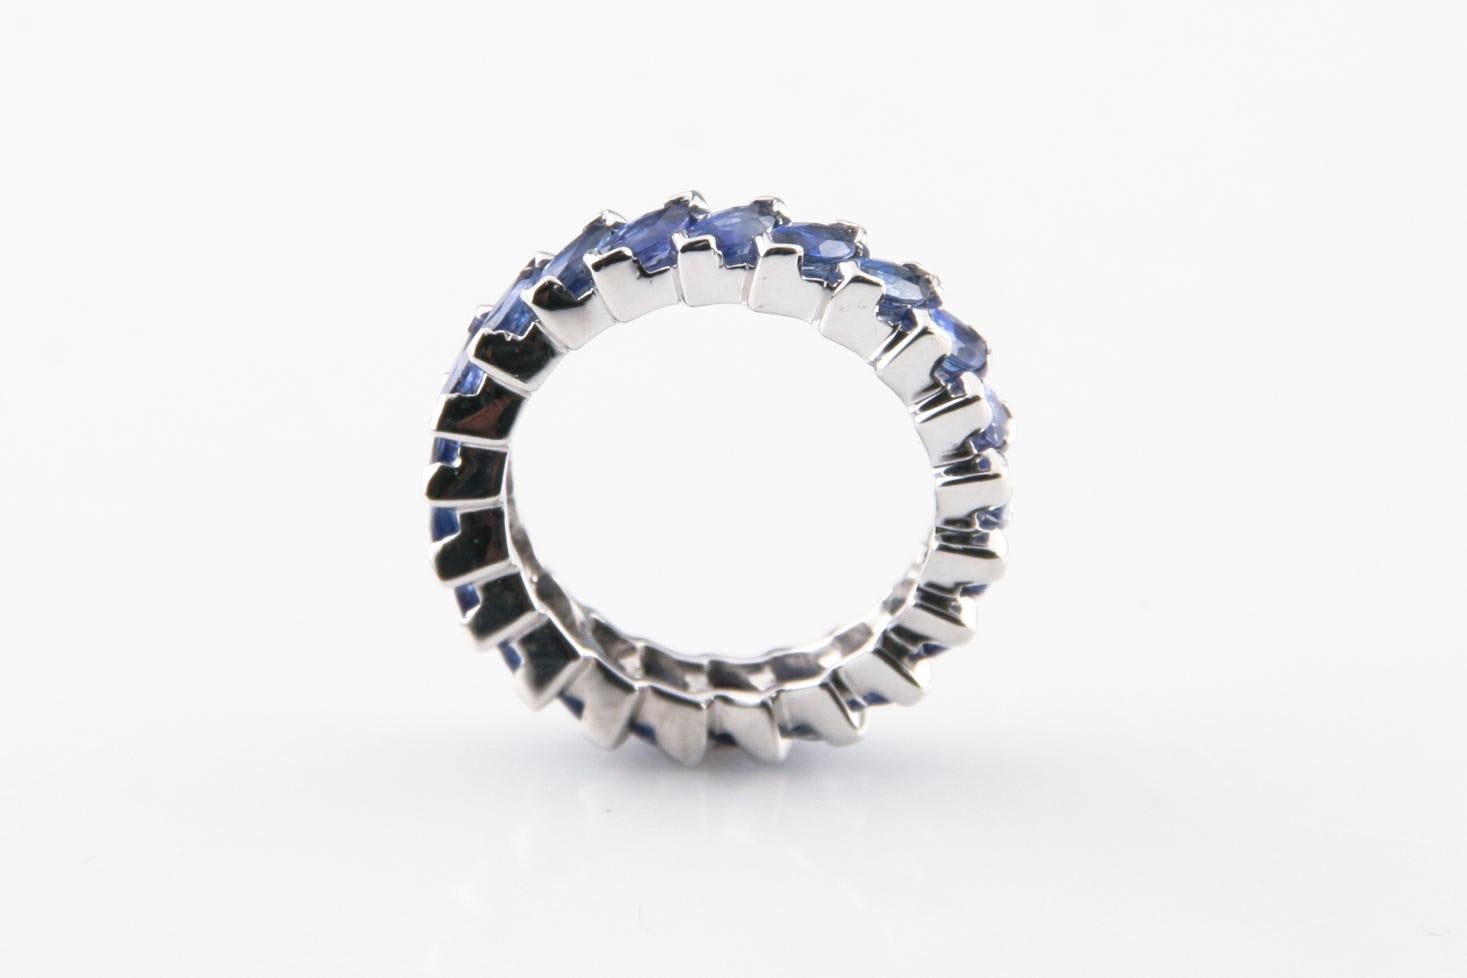 RING SIZE: 6
BAND WIDTH: 5 mm
METAL: Platinum
SAPPHIRE WEIGHT:  3.36 CT.
TOTAL WEIGHT: 7.82 GR.